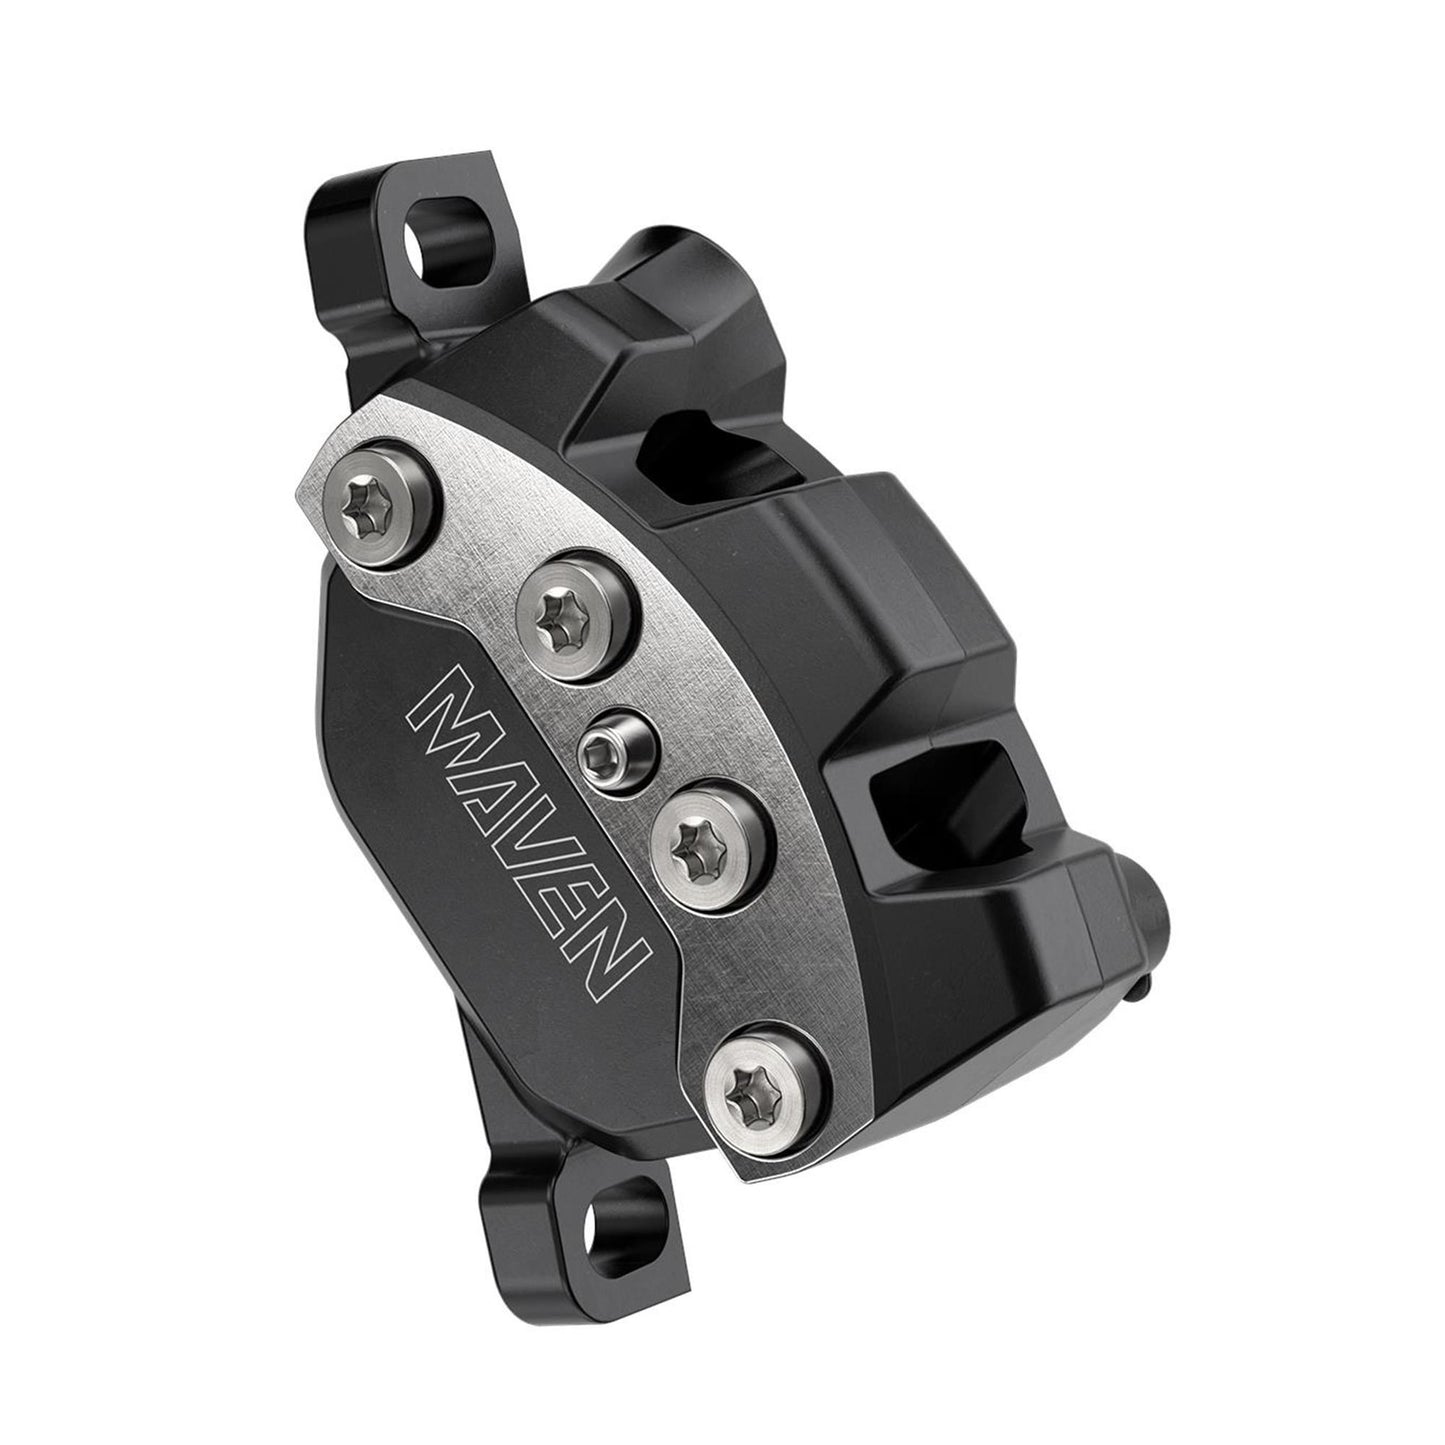 SRAM DISC BRAKE MAVEN ULTIMATE STEALTH - ALUMINUM LEVER, TI HARDWARE, REACH/CONTACT ADJ ,SWINGLINK, CLEAR ANO (INCLUDES MMX CLAMP, BRACKET) (ROTOR SOLD SEPARATELY) A1